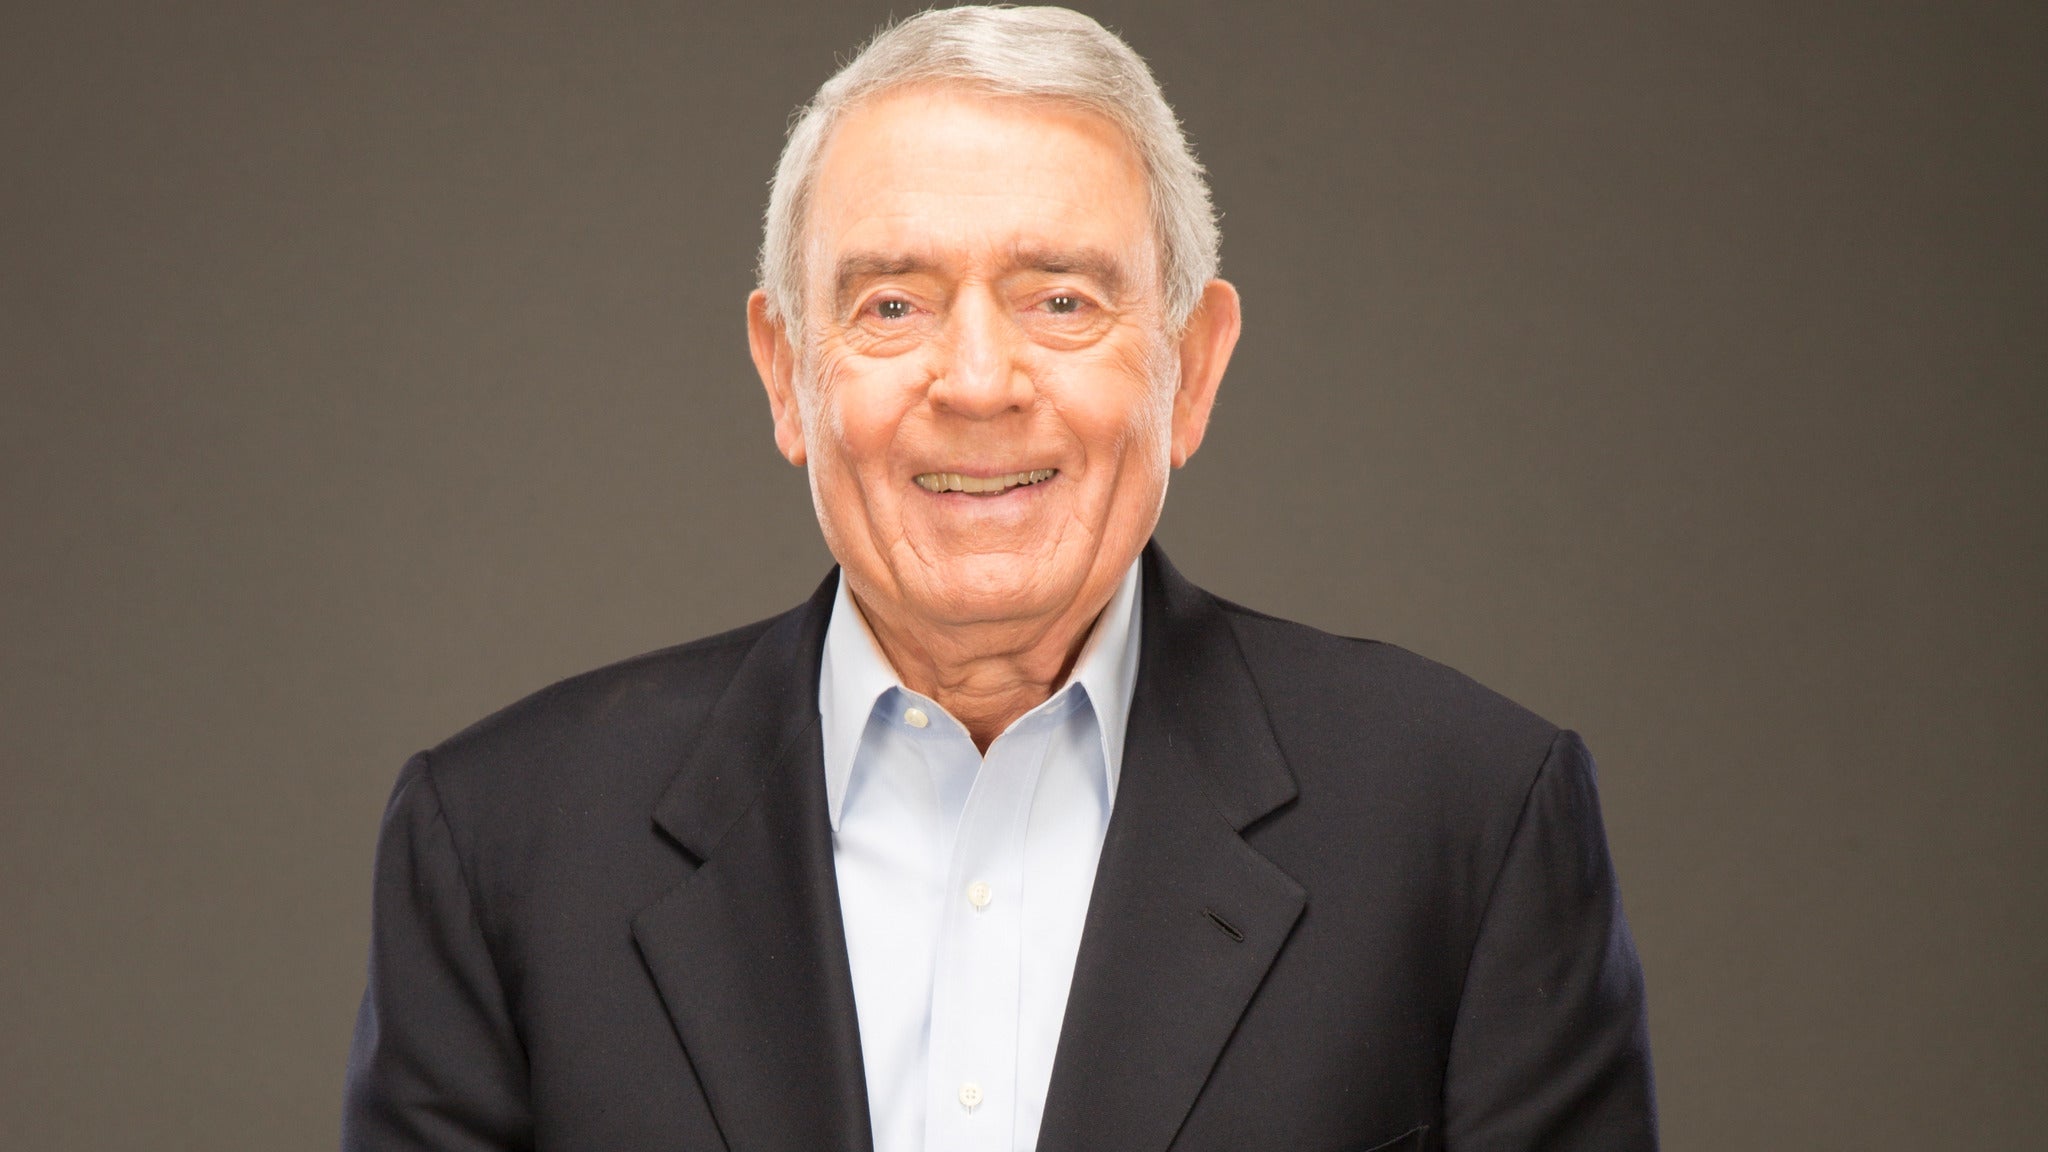 An Evening With Dan Rather in Riverside promo photo for Live Nation Mobile App presale offer code